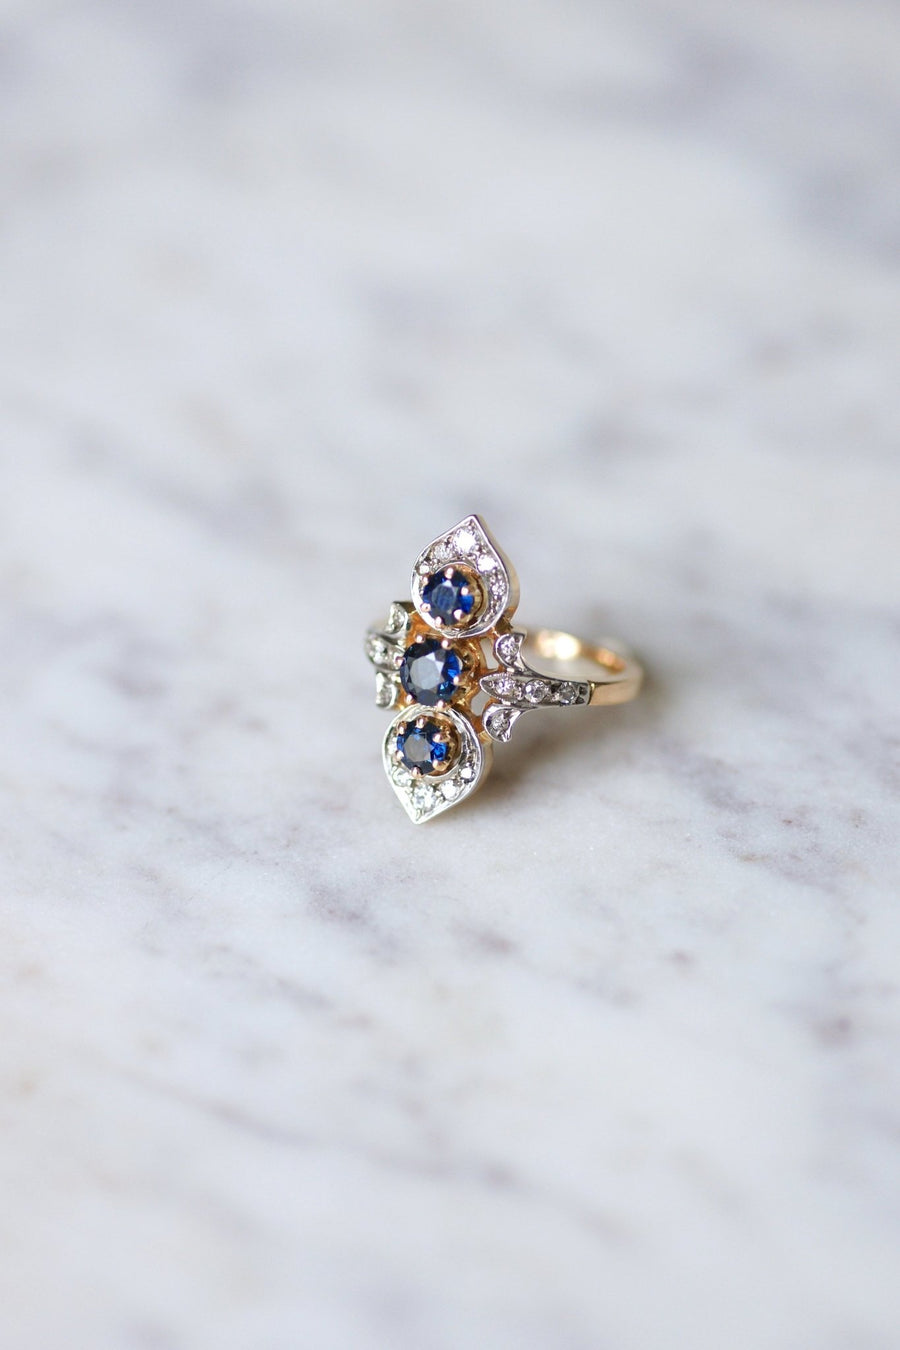 Marquise ring Victorian style sapphires surrounded by diamonds on gold - Galerie Pénélope